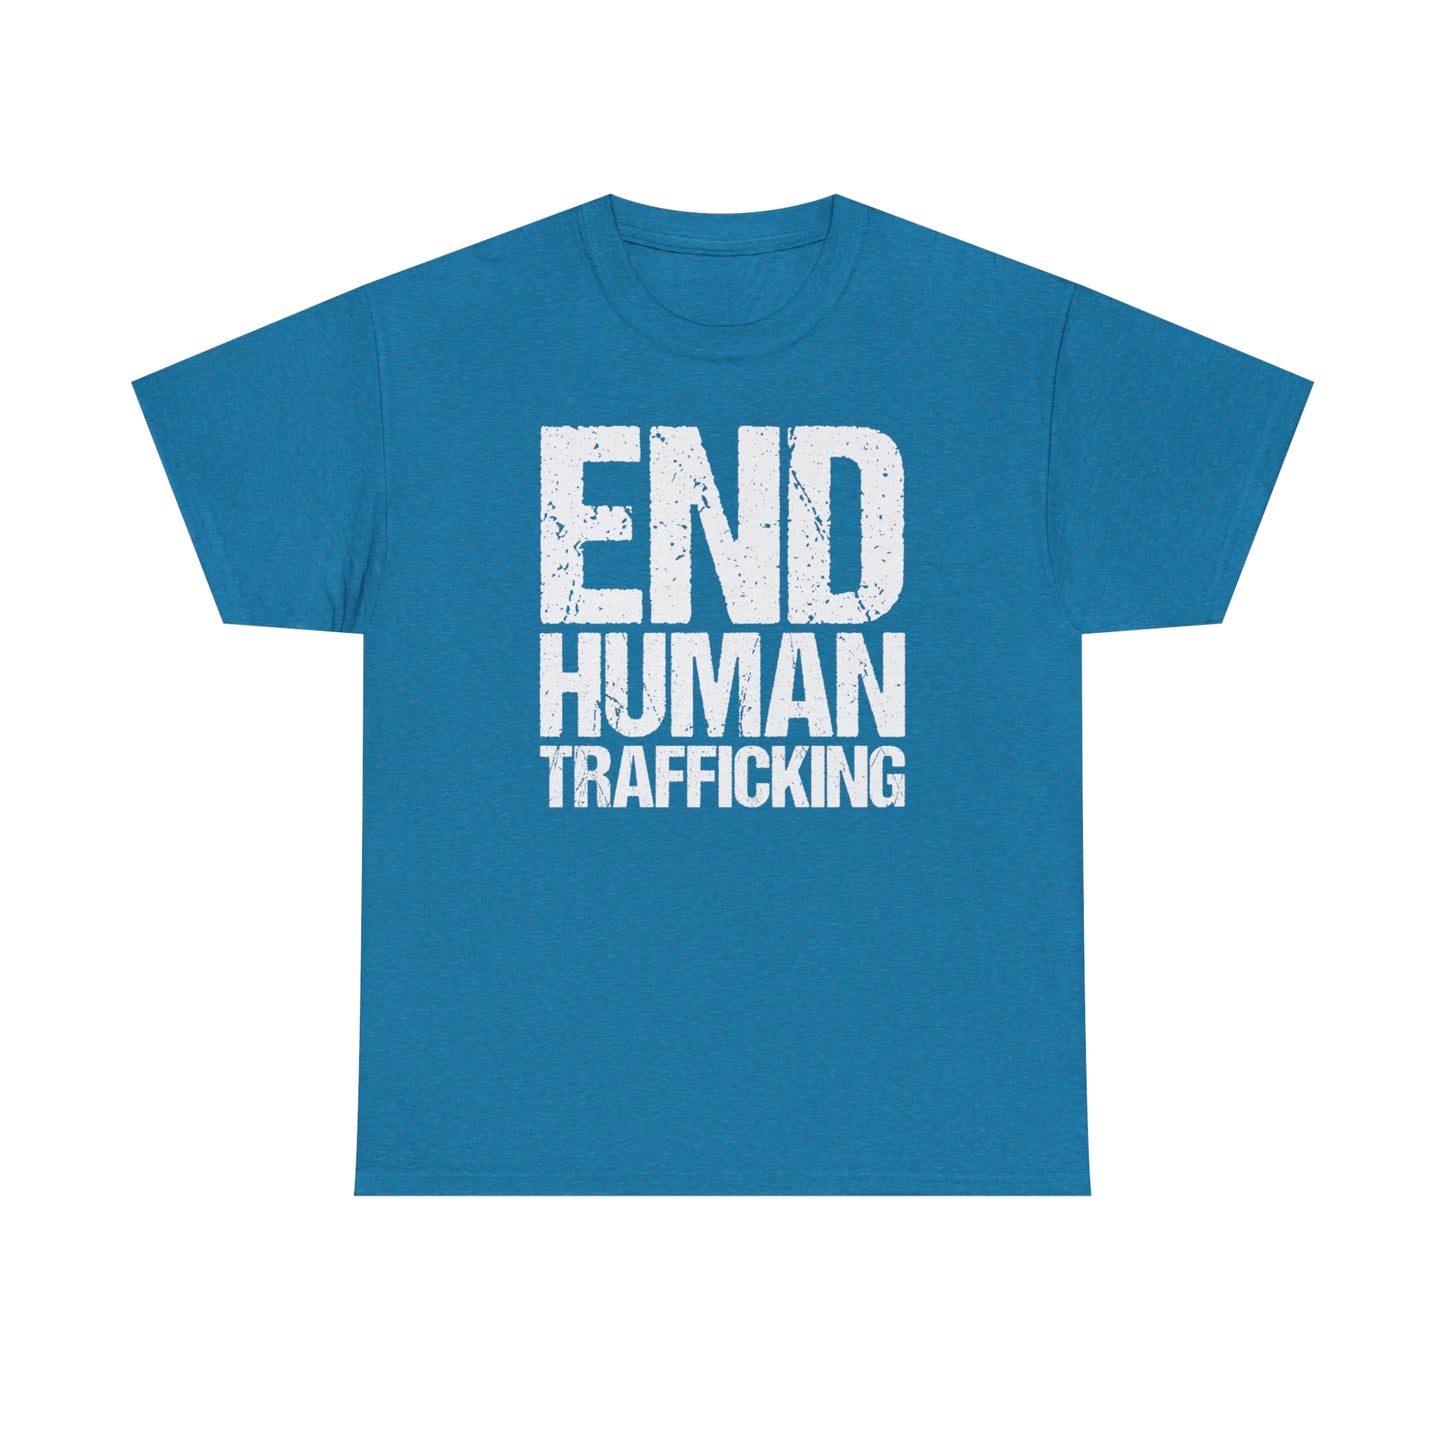 End Human Trafficking TShirt Trafficking Awareness T-Shirt For Conservative Shirt Save The Children Awareness T Shirt For A Cause Help Shirt